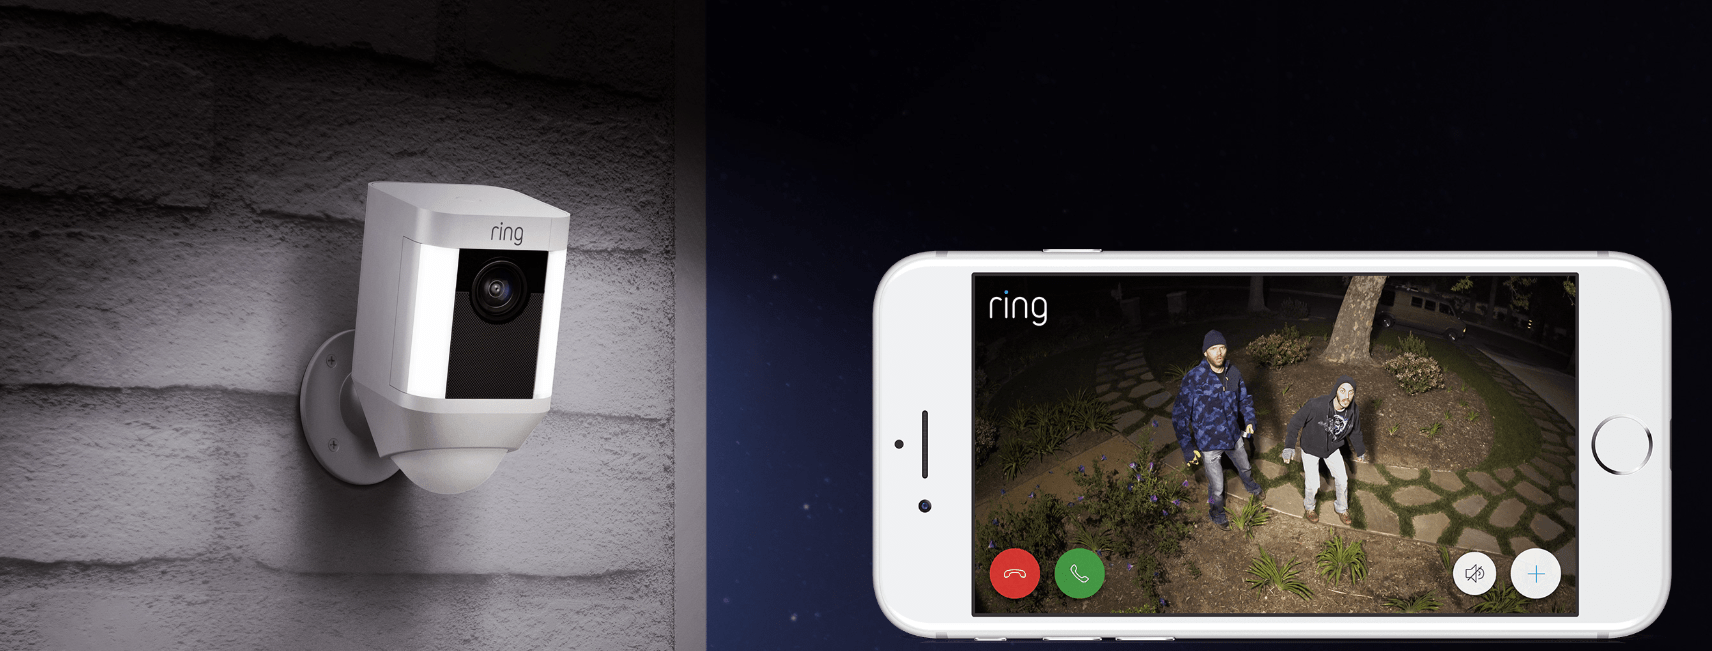 Know a Bit About Ring Spotlight Cam